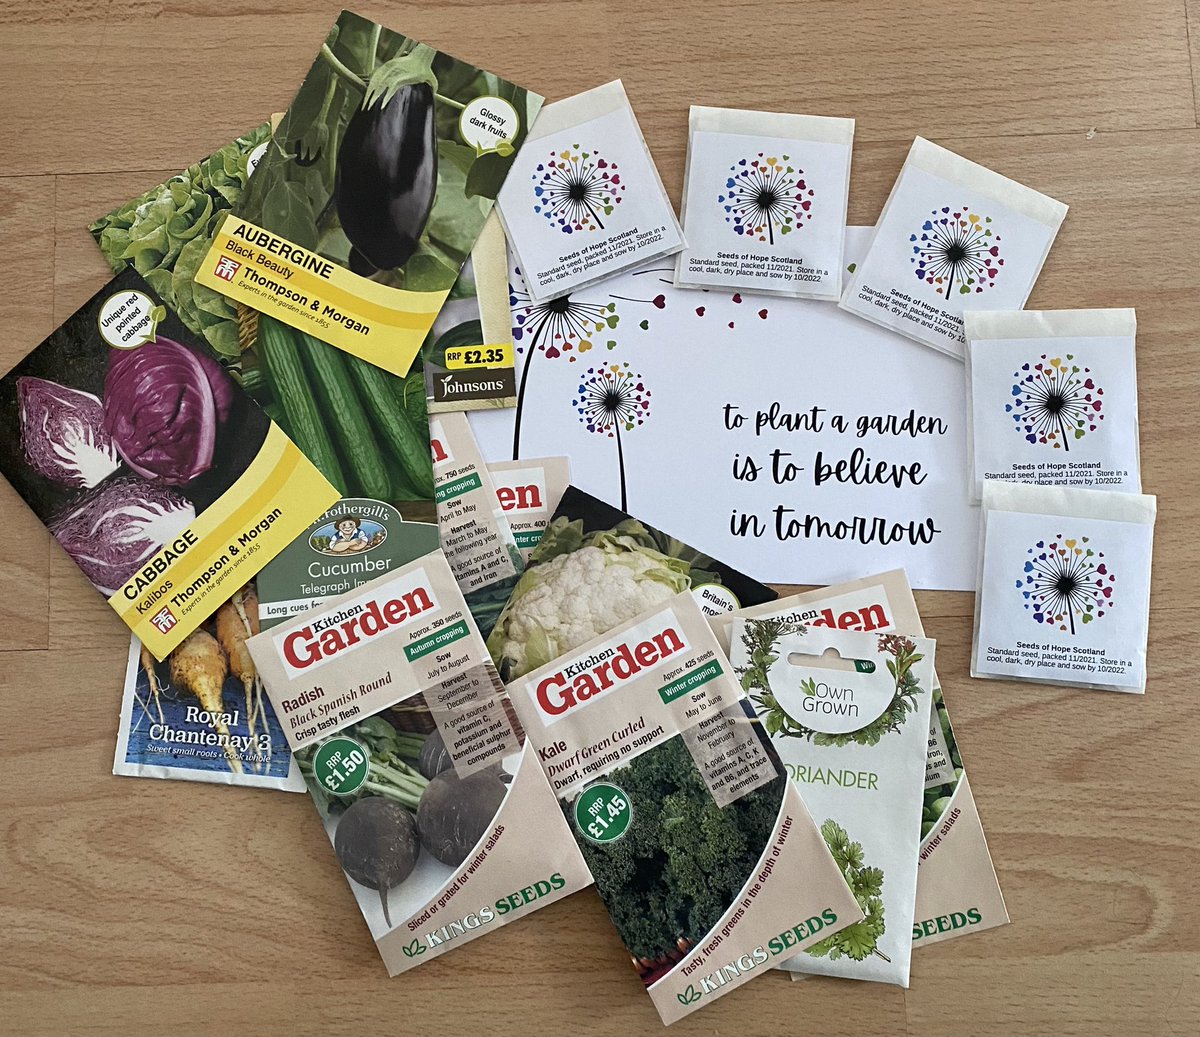 Thanks so much to @SeedsOfHopeScot for their wonderful donation of seeds for @AultmoreParkPri new planting area! can’t wait until after the holidays to get the children out planting 🌱 💕@TrustConnect #communitygrowing #communitypartnerships #plantgroweat